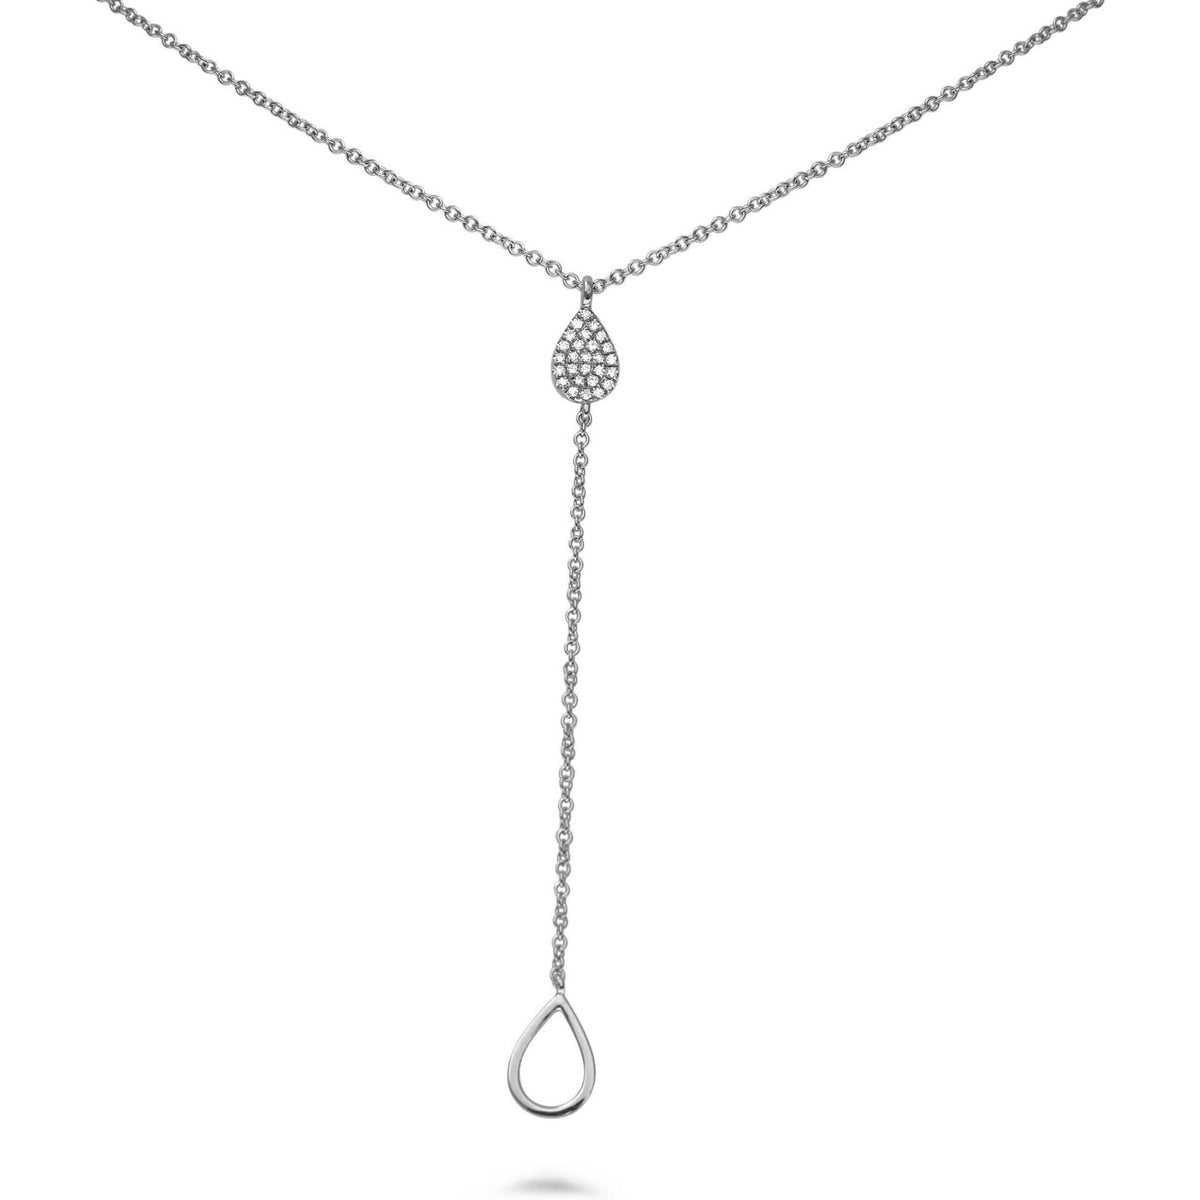 Roman & Jules 14K White Gold Y Shaped Necklace with Pear-Shaped Diamond Pendant - 0.07 Carat Total Diamond Weight